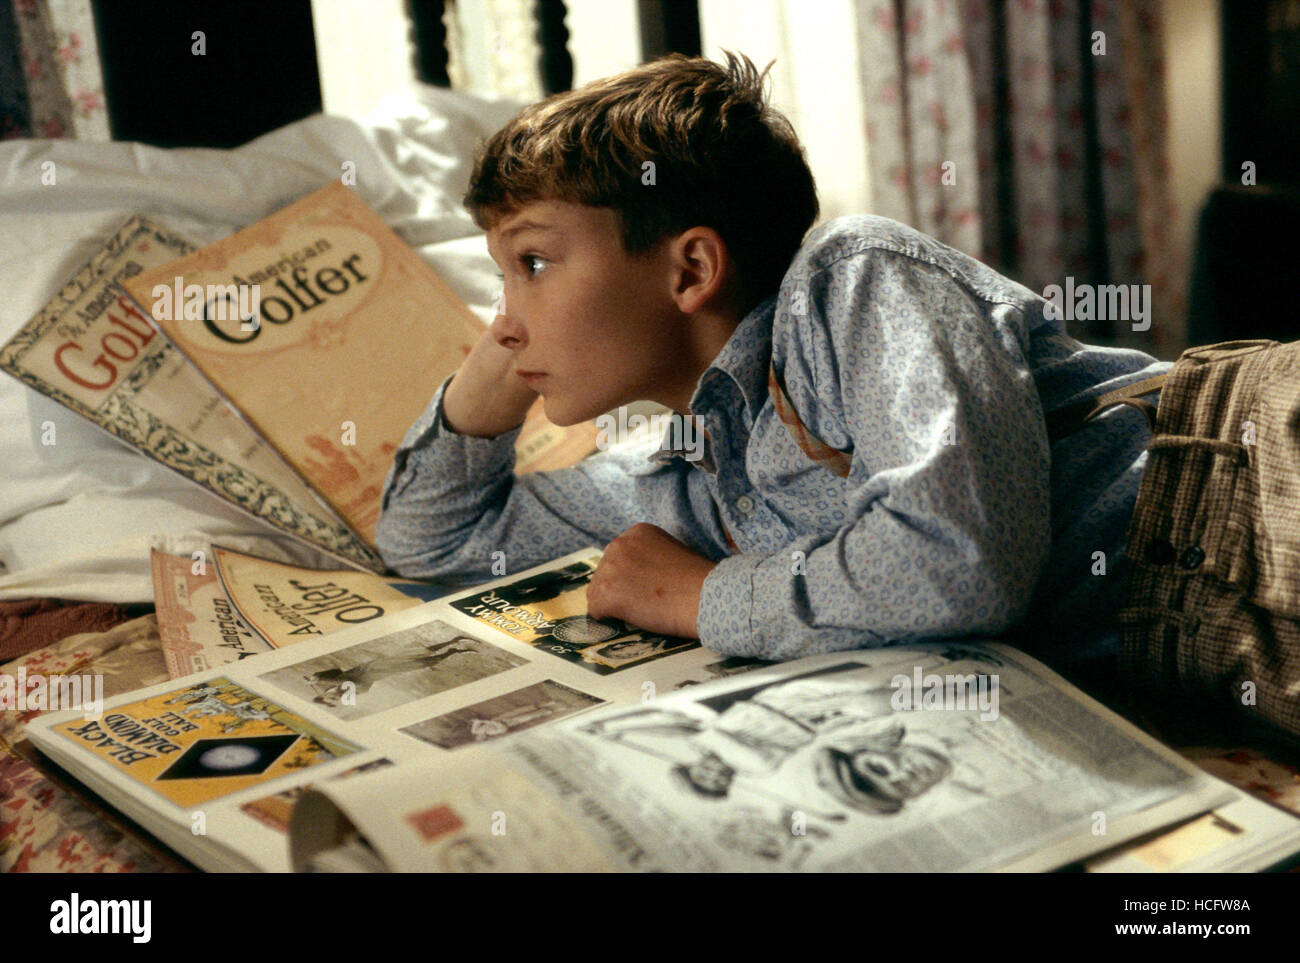 THE LEGEND OF BAGGER VANCE, J. Michael Moncrief, 2000 Stock Photo - Alamy